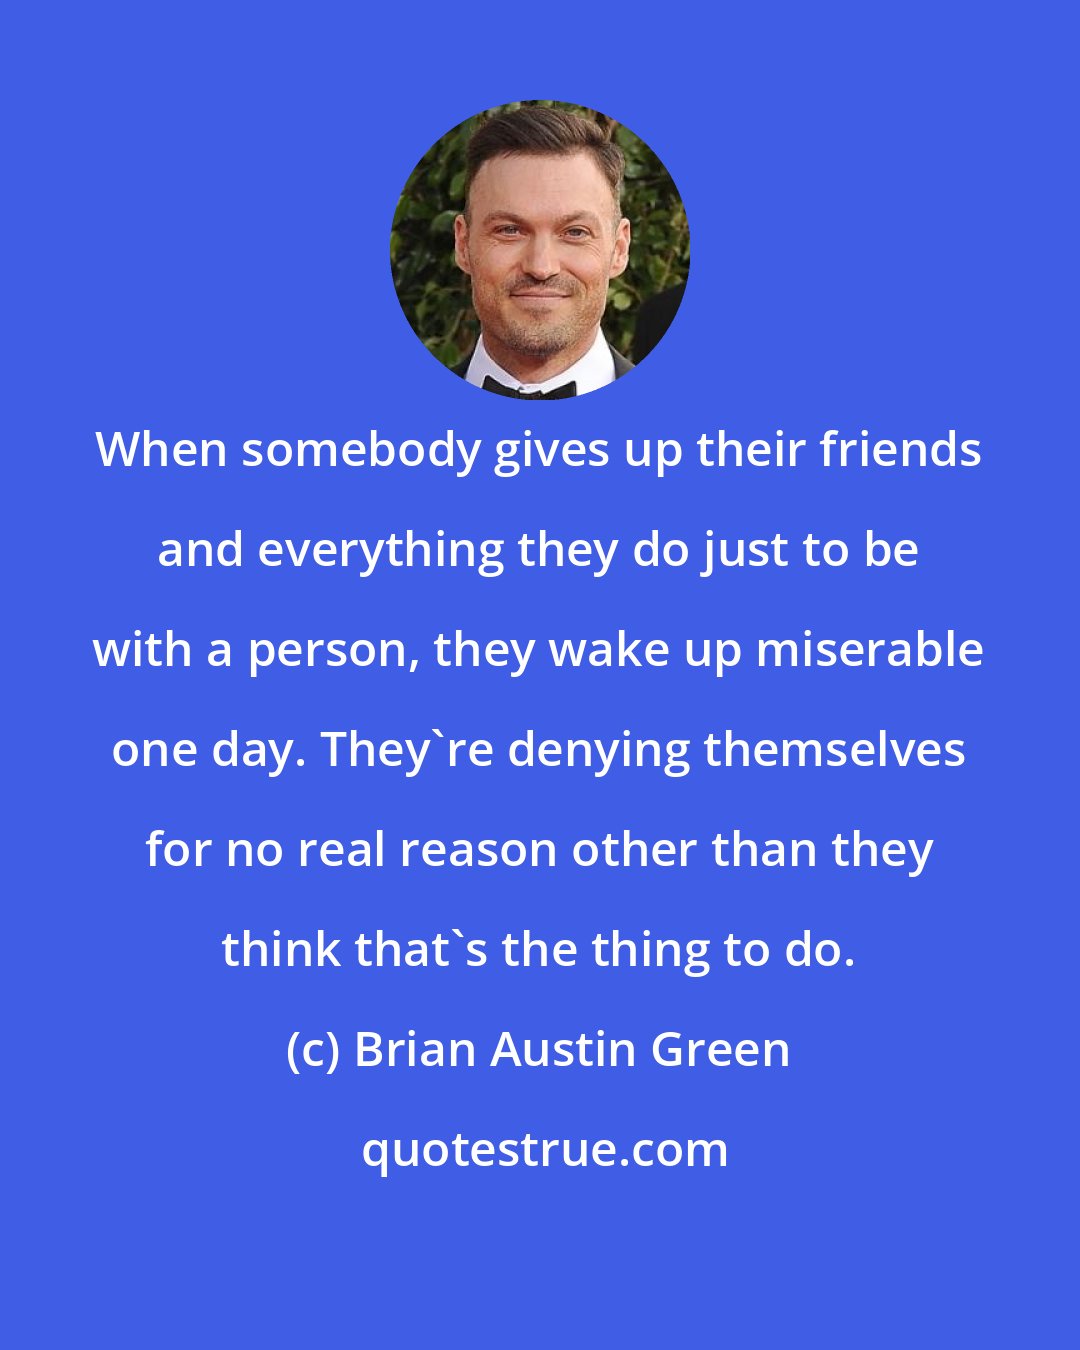 Brian Austin Green: When somebody gives up their friends and everything they do just to be with a person, they wake up miserable one day. They're denying themselves for no real reason other than they think that's the thing to do.